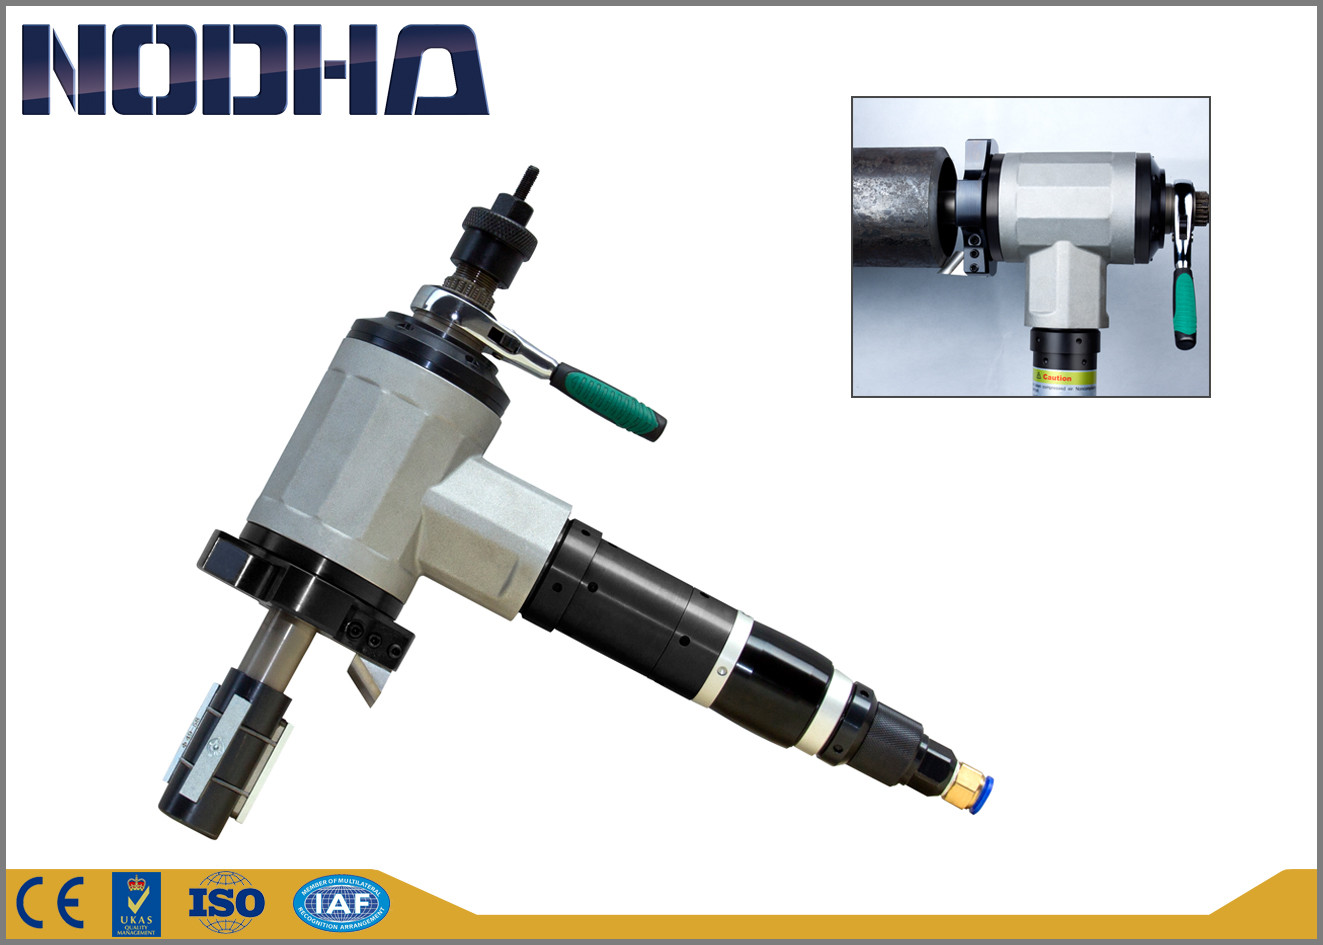 8.15kgs Pneumatic Beveling Tools , Cold Cutting Machine Compact Design clamping range ID 28-76mm